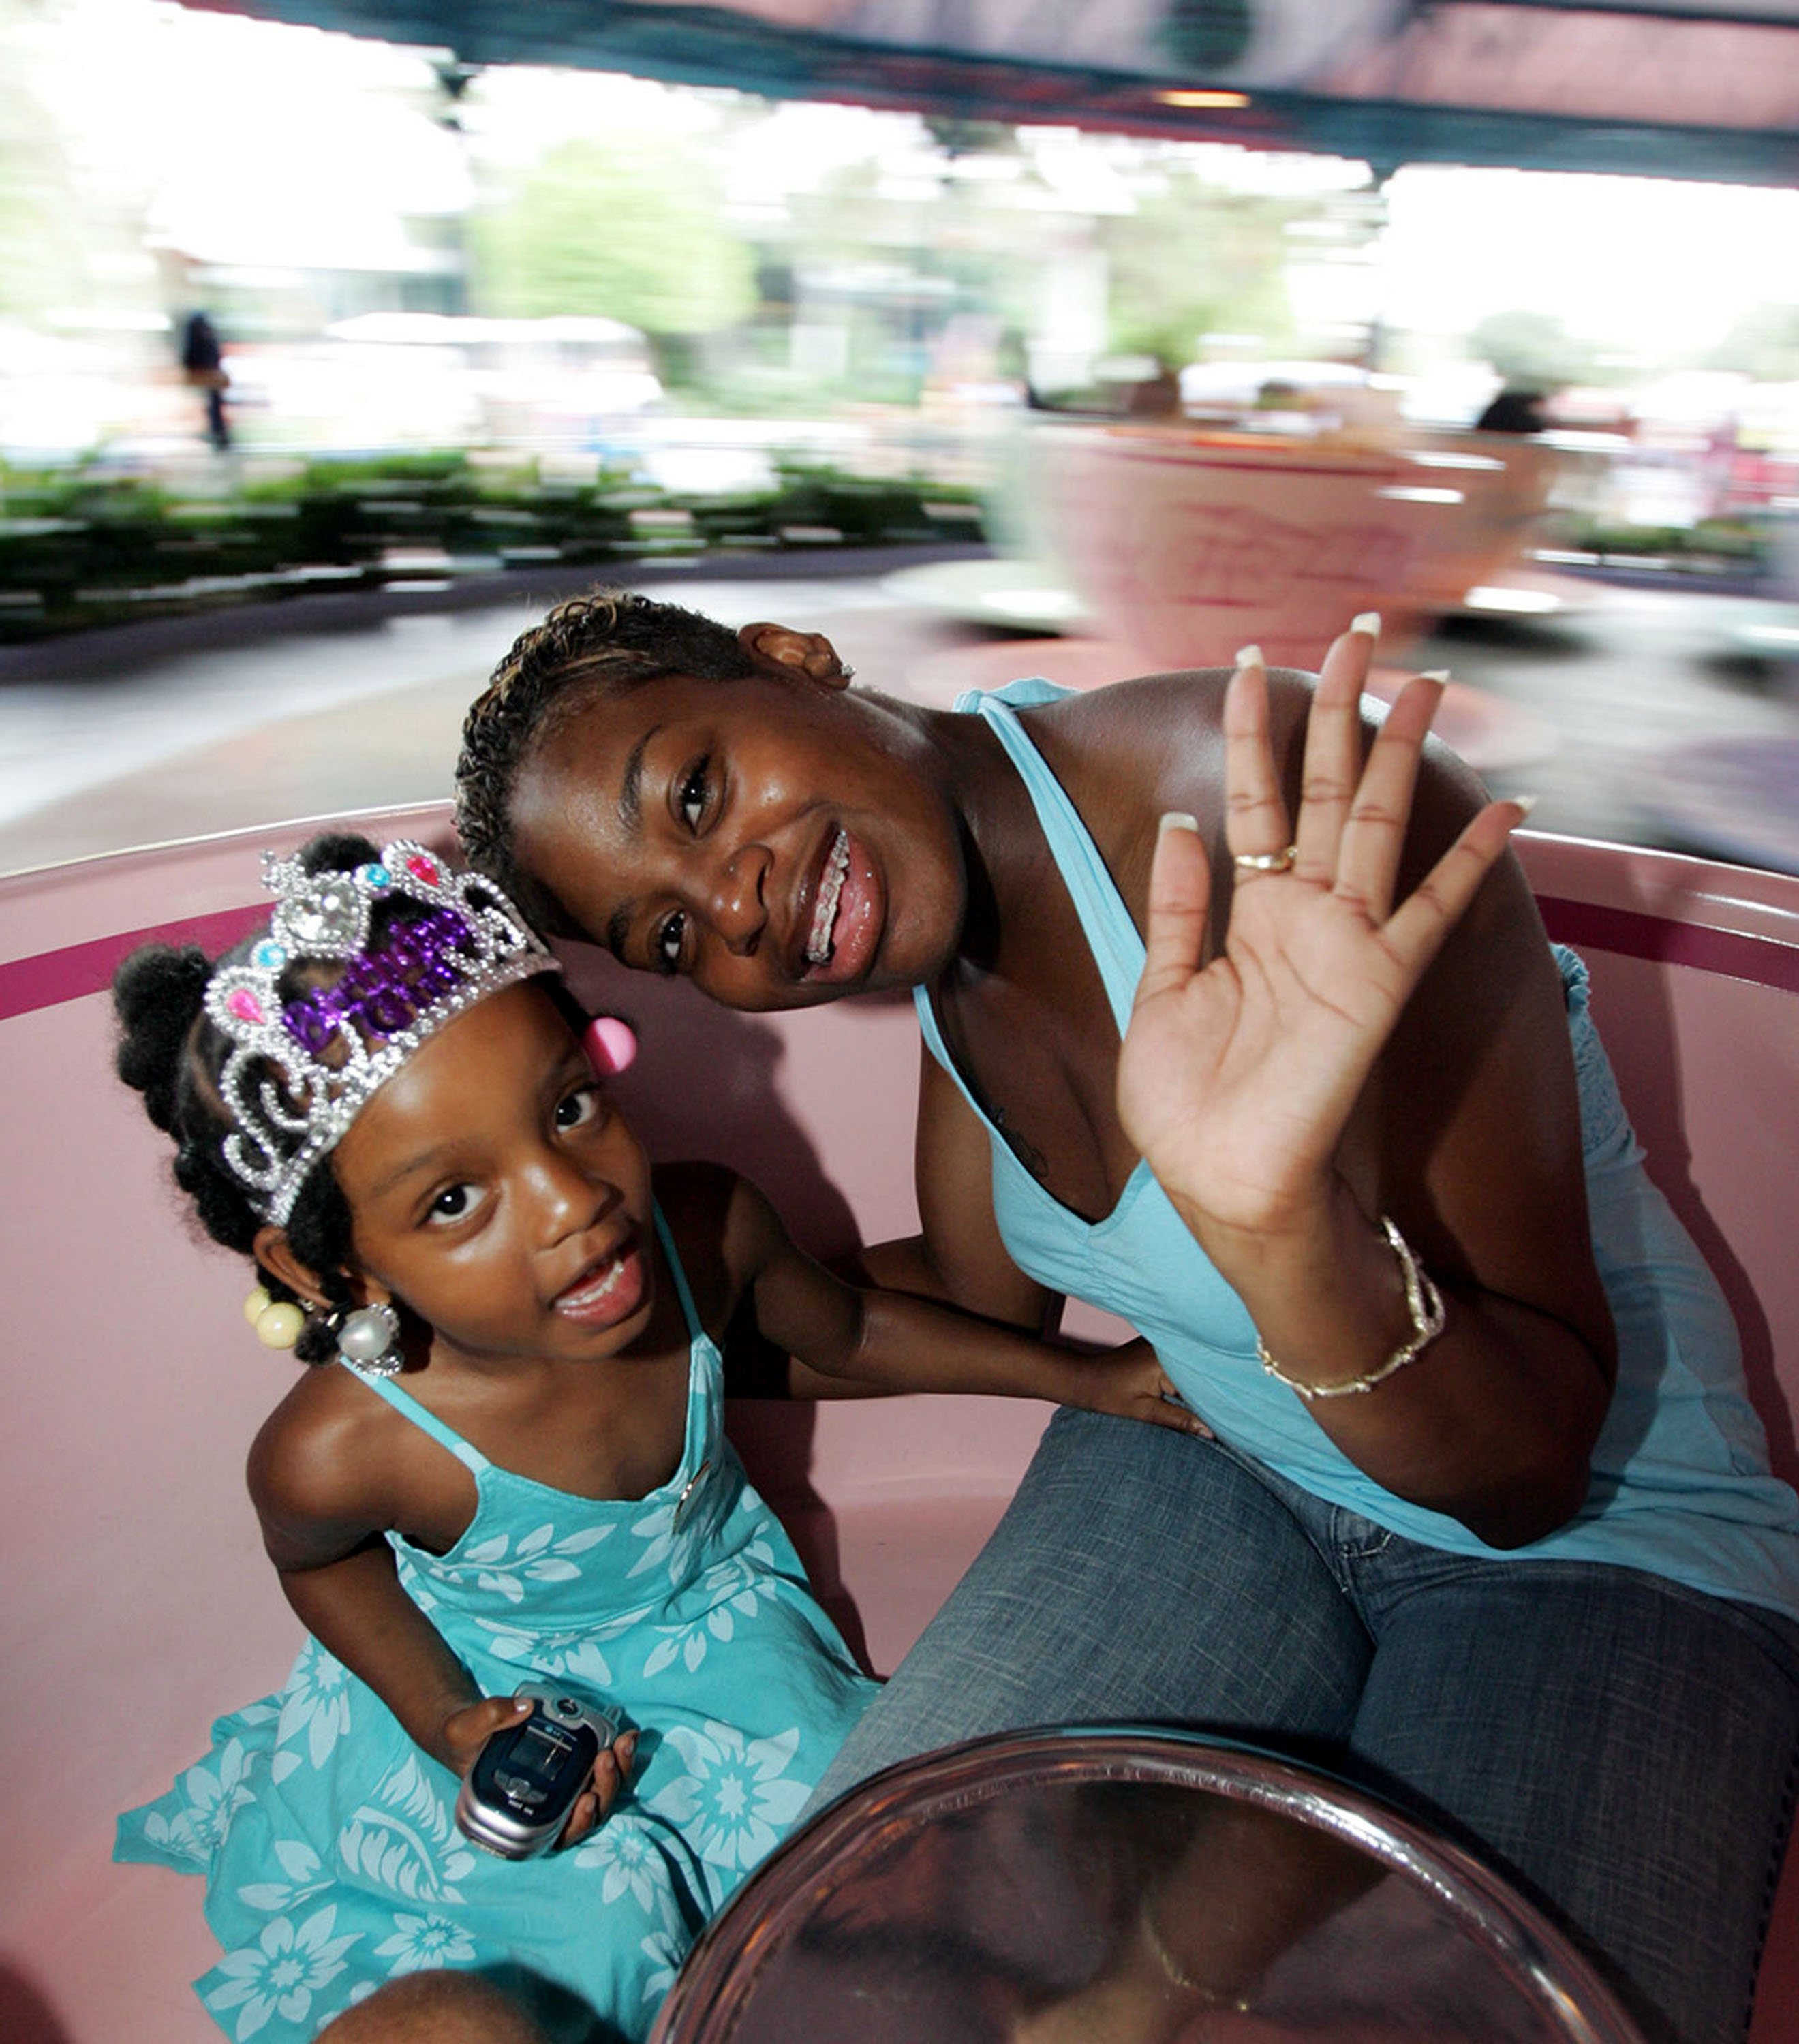 Fantasia Barrino and Zion, 4, at Walt Disney's Magic Kingdom on Aug. 8, 2005 in Florida. | Photo: Getty images